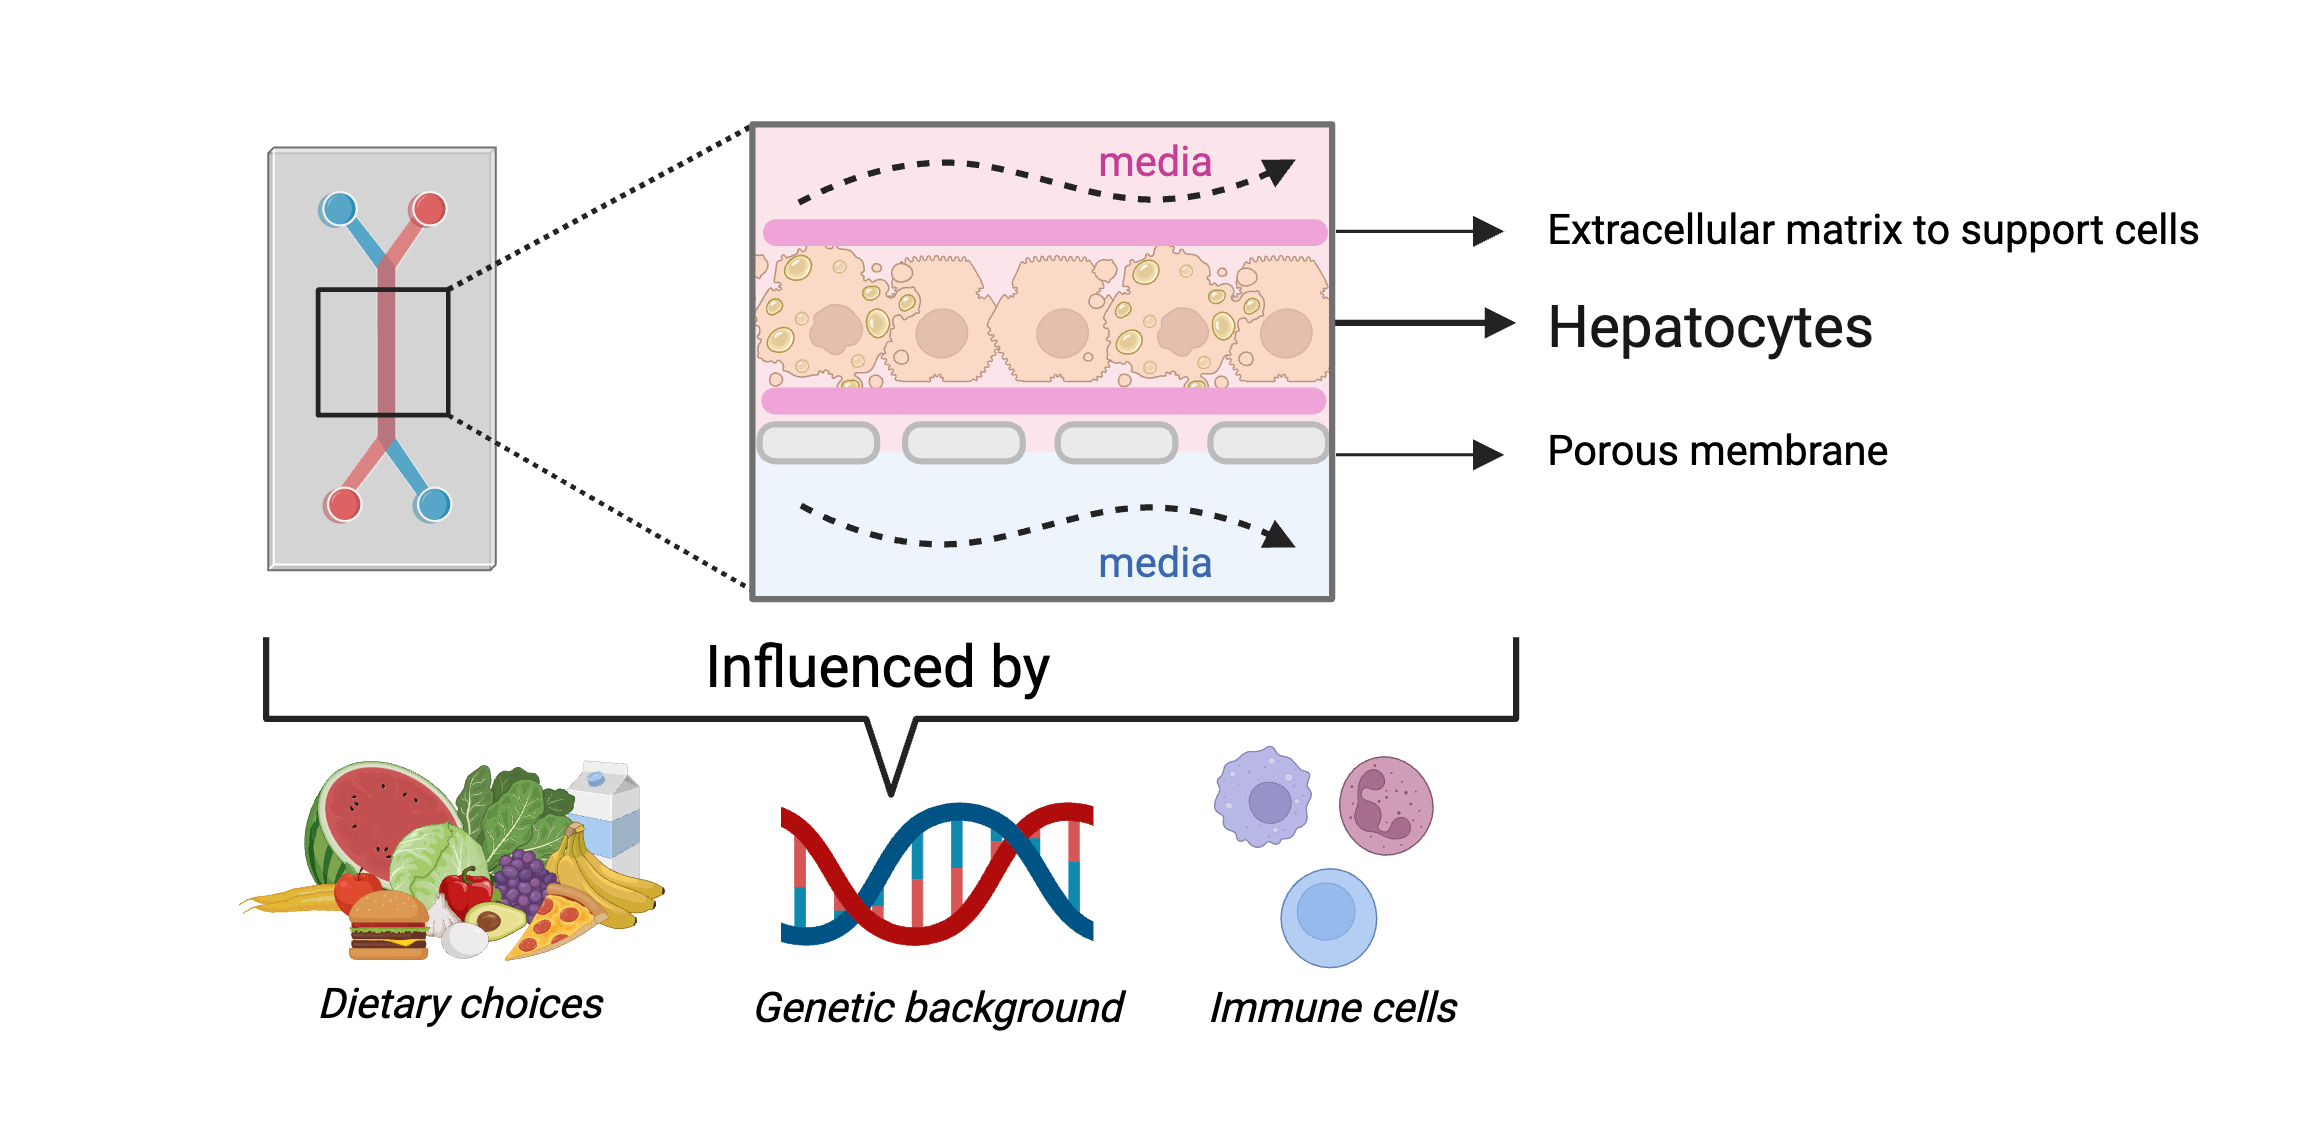 Figure 1: Schematic representation of the liver-on-a-chip model with ‘fatty’ hepatocytes.